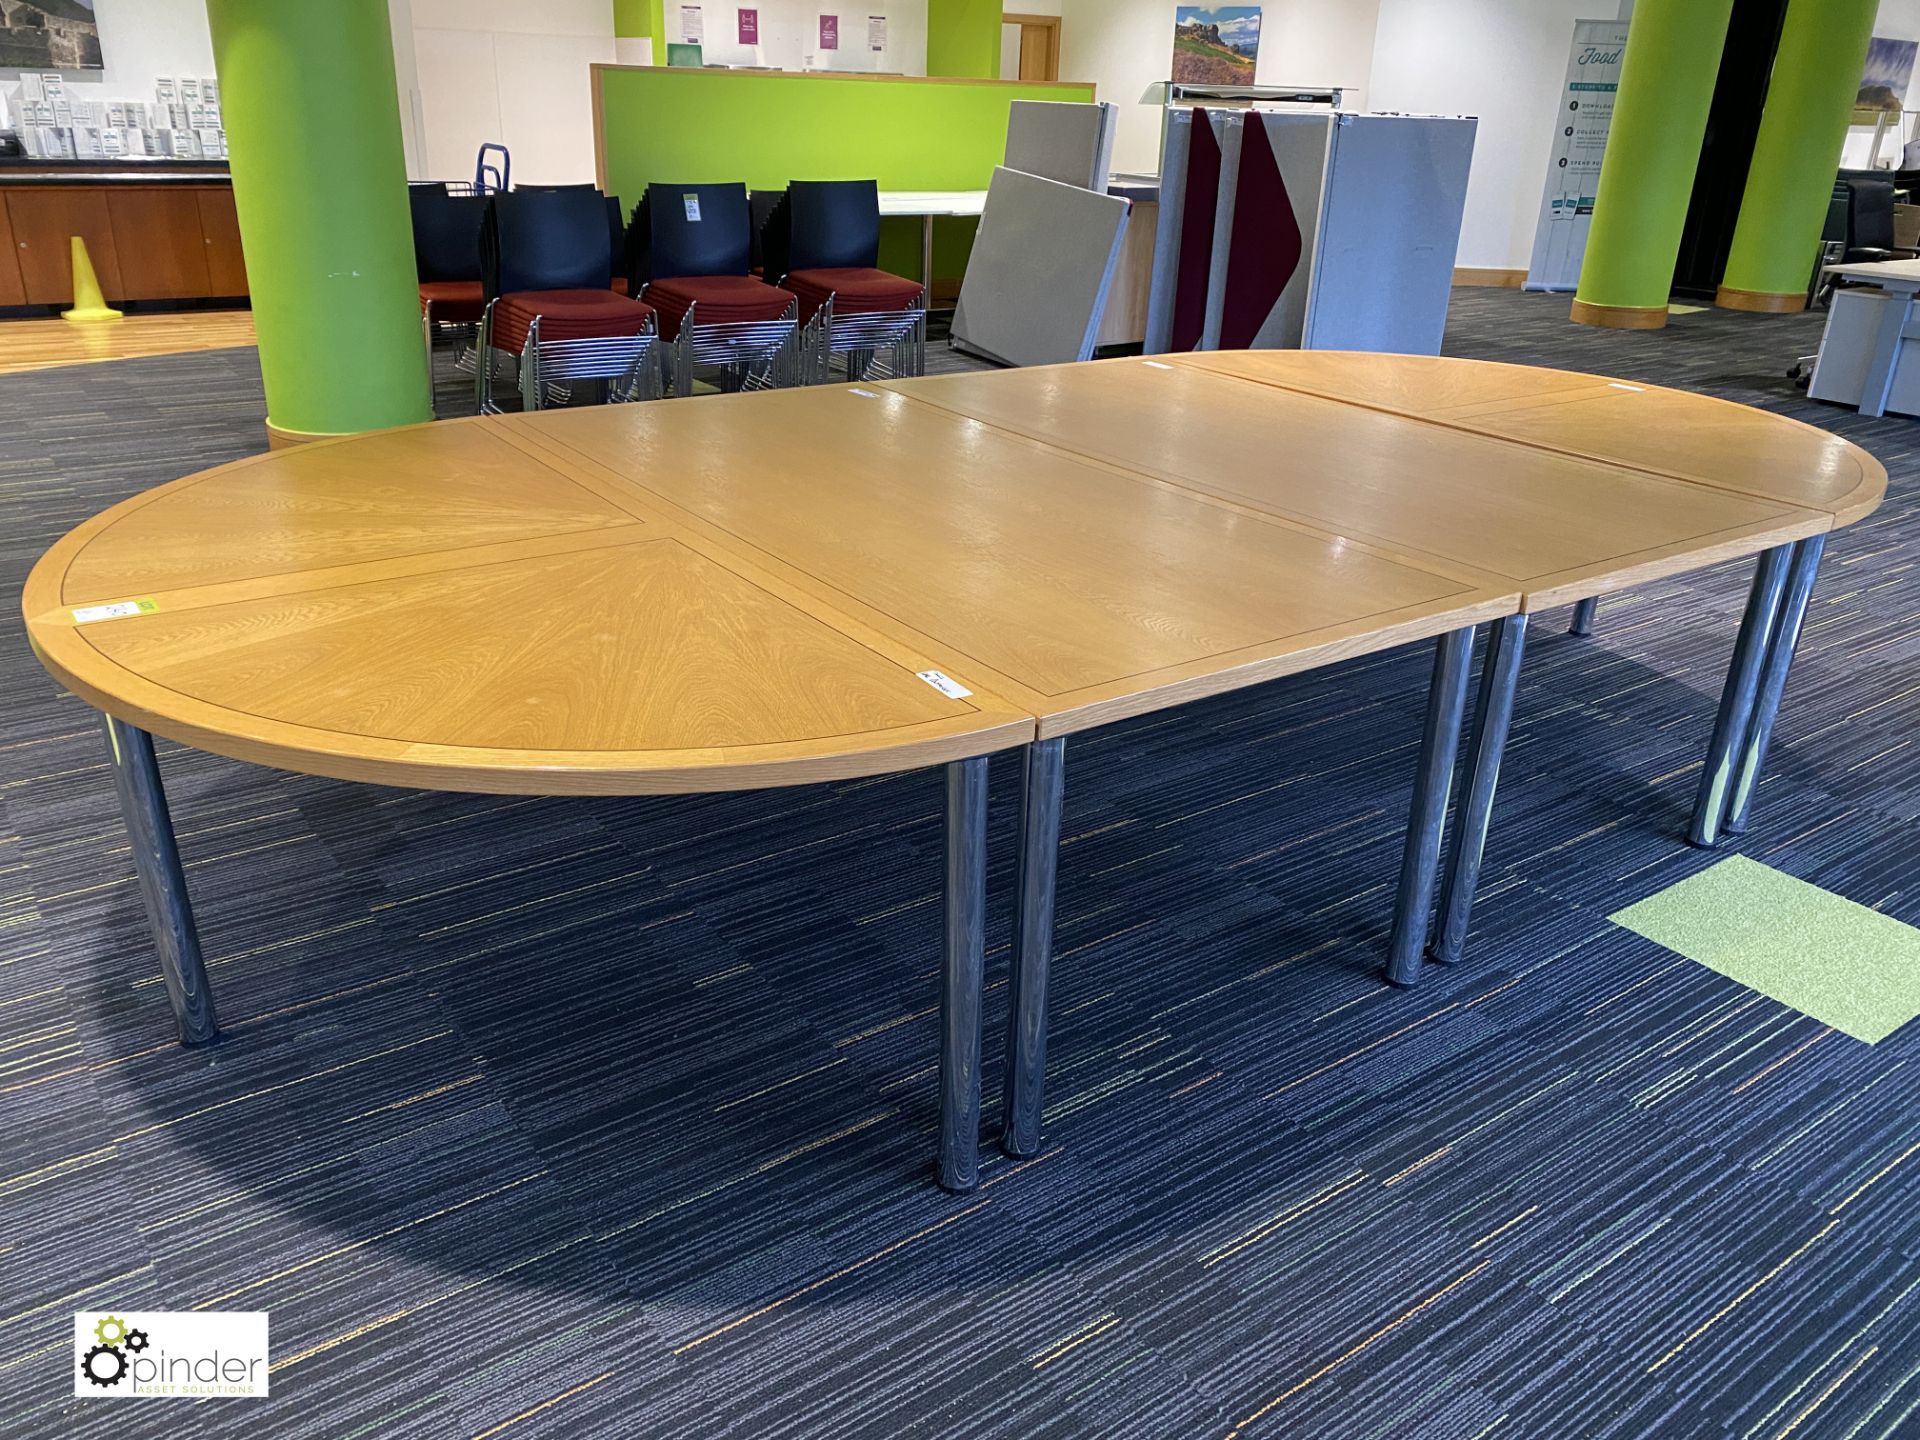 Light oak inlaid 4-section Boardroom Table, total overall dimension 4000mm x 2000mm - Image 2 of 8